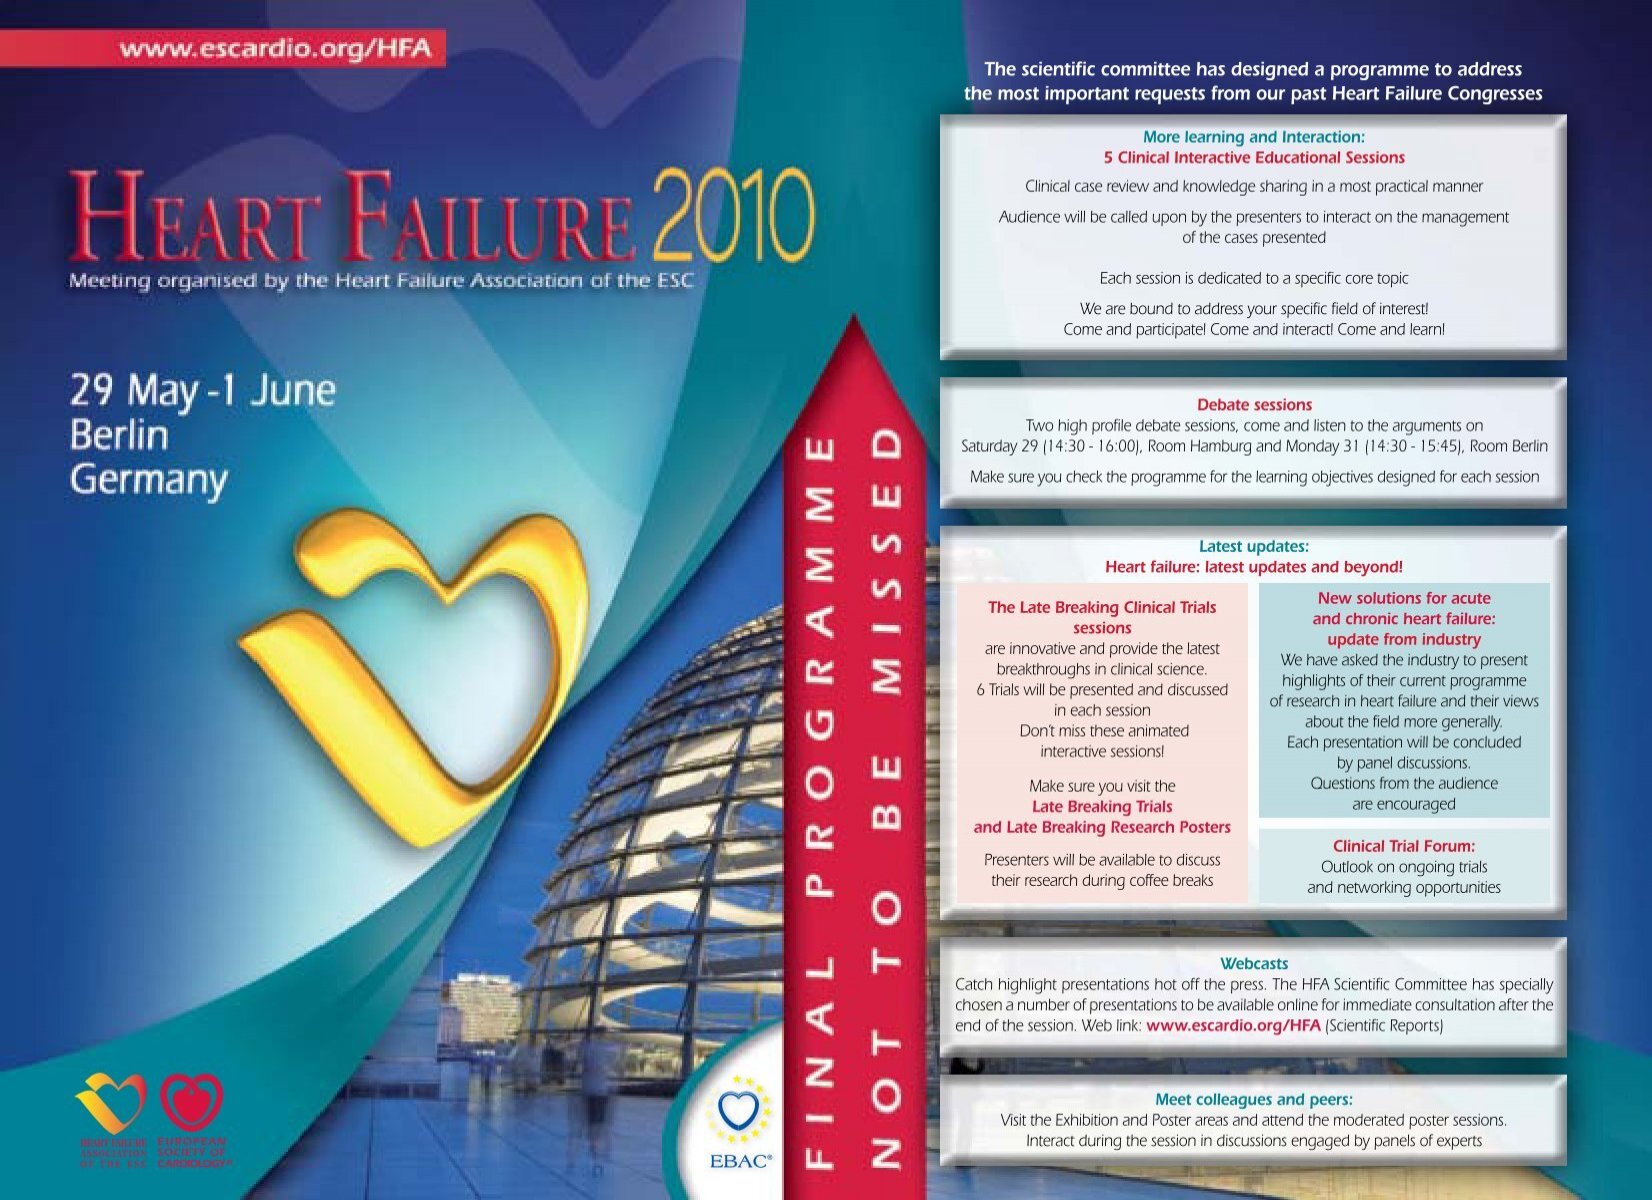 monday posters sessions - European Society of Cardiology